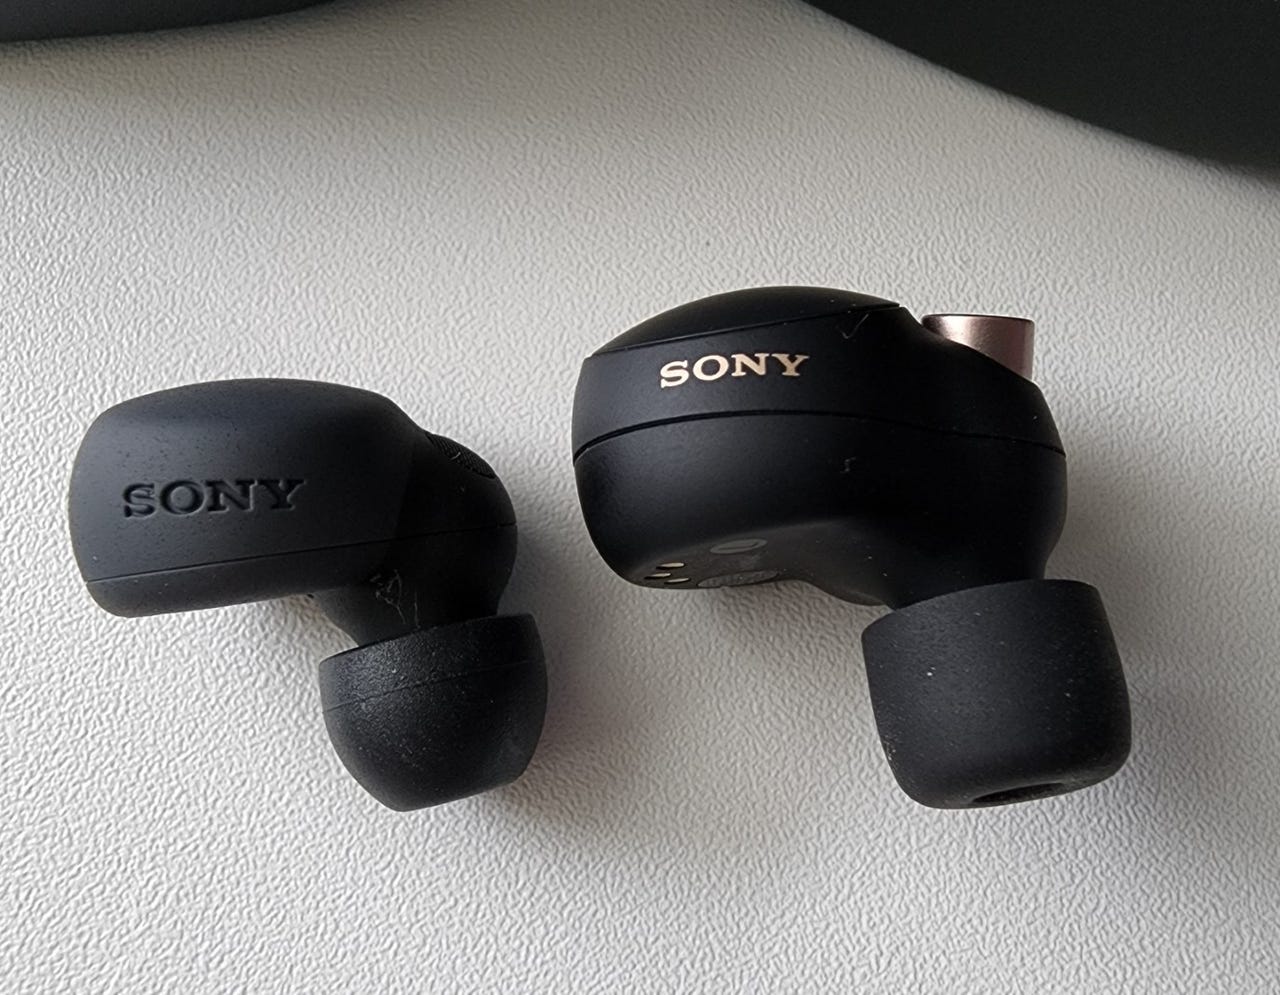 Sony introduces LinkBuds S: The small, light and wireless earbuds